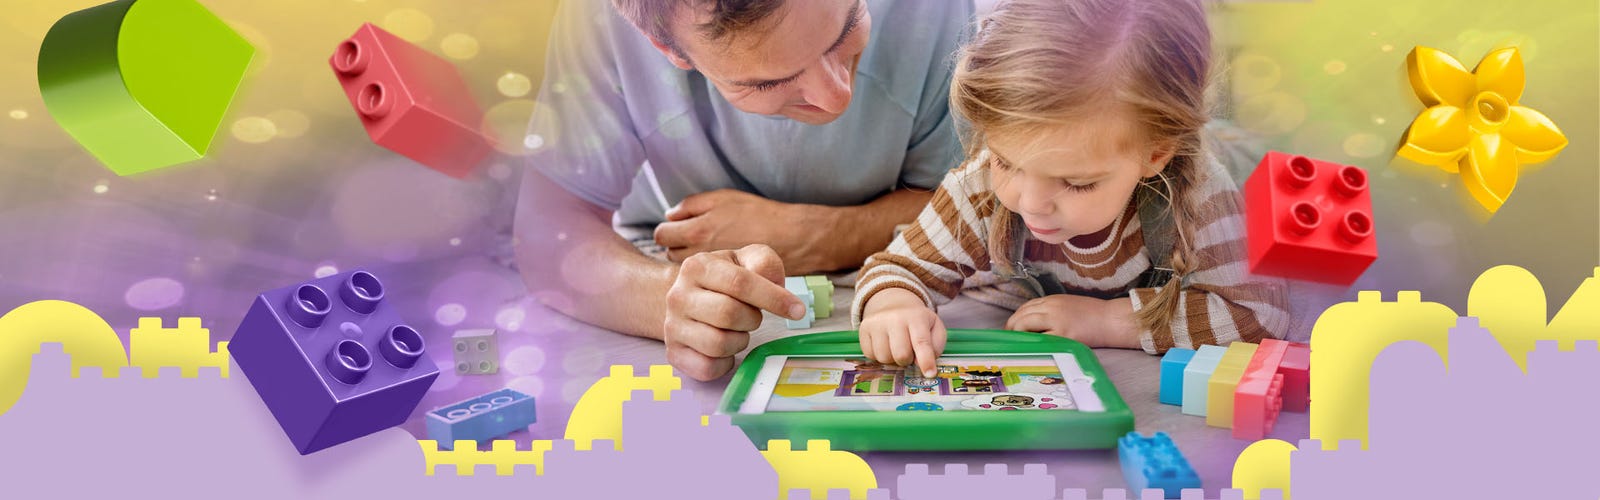 LEGO® DUPLO® Connected Train – Applications sur Google Play